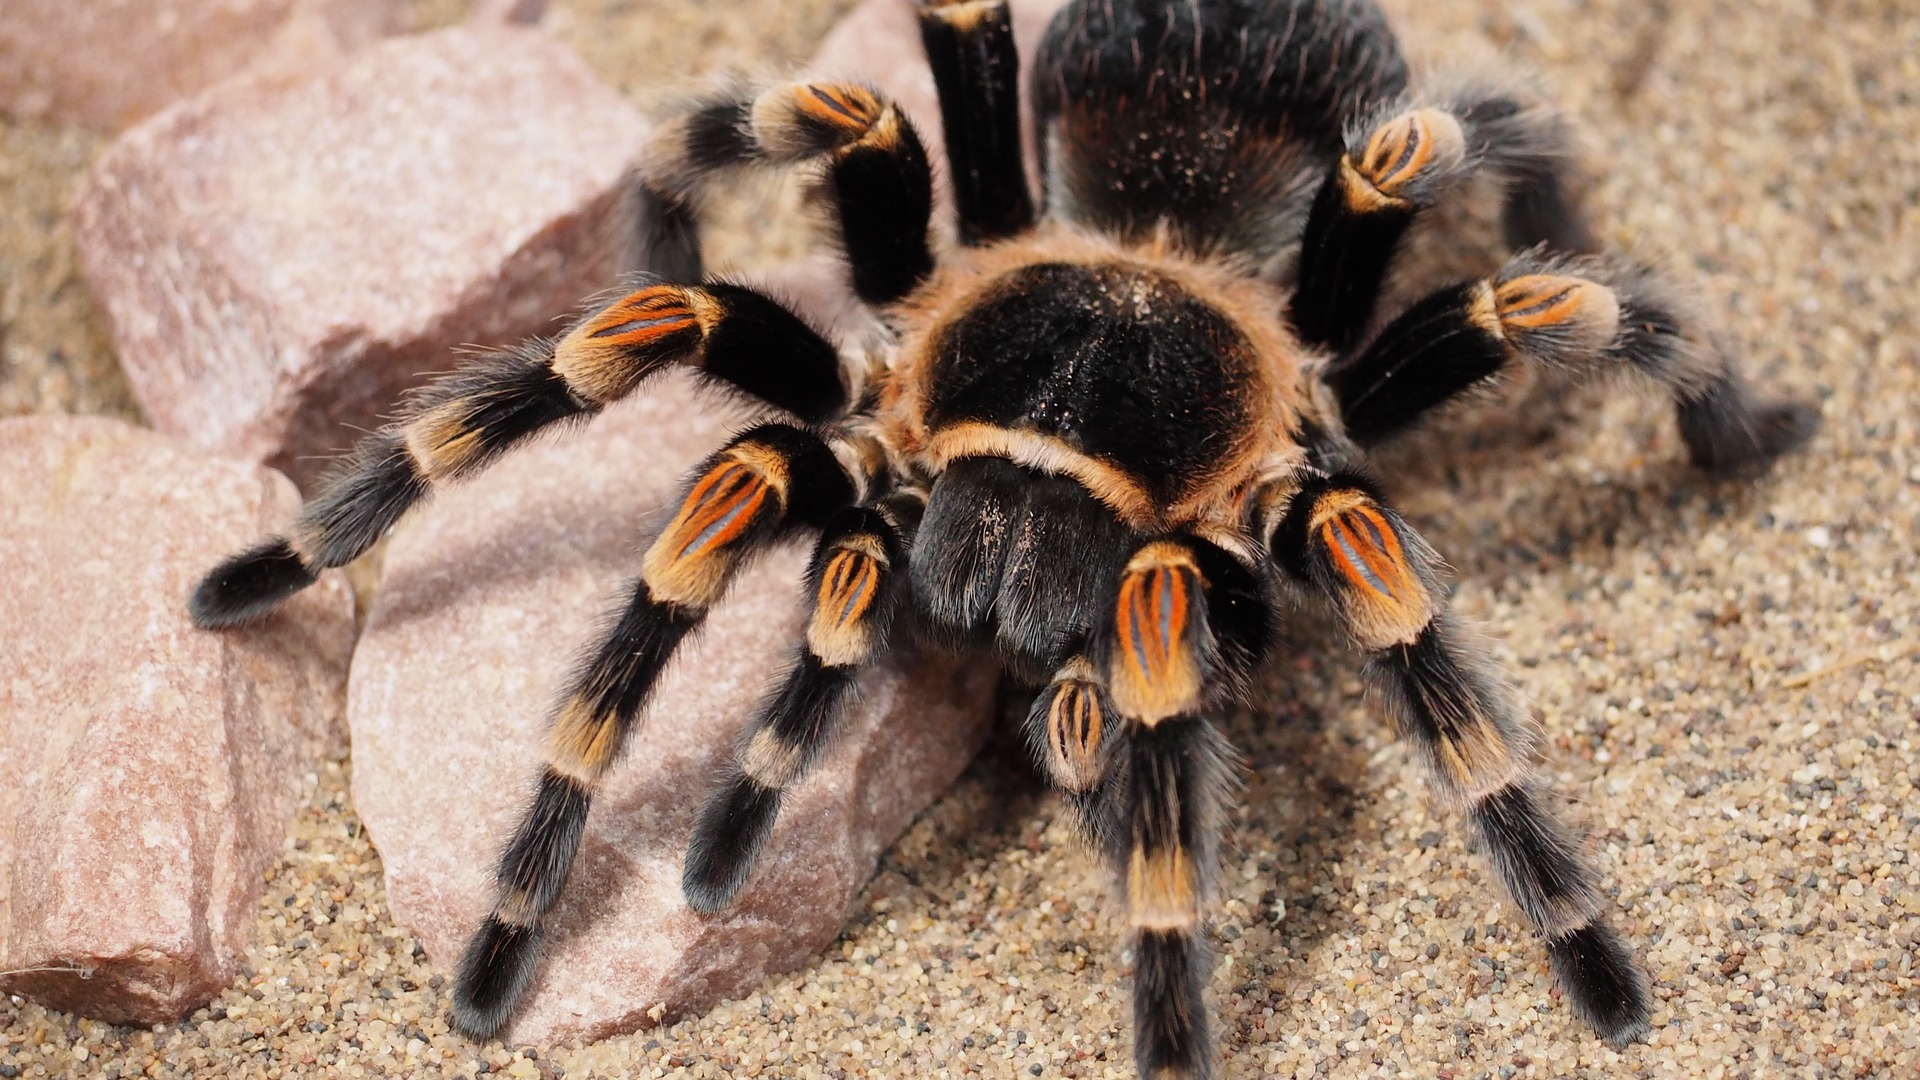 Mexican red knee tarantula on sand and rocks